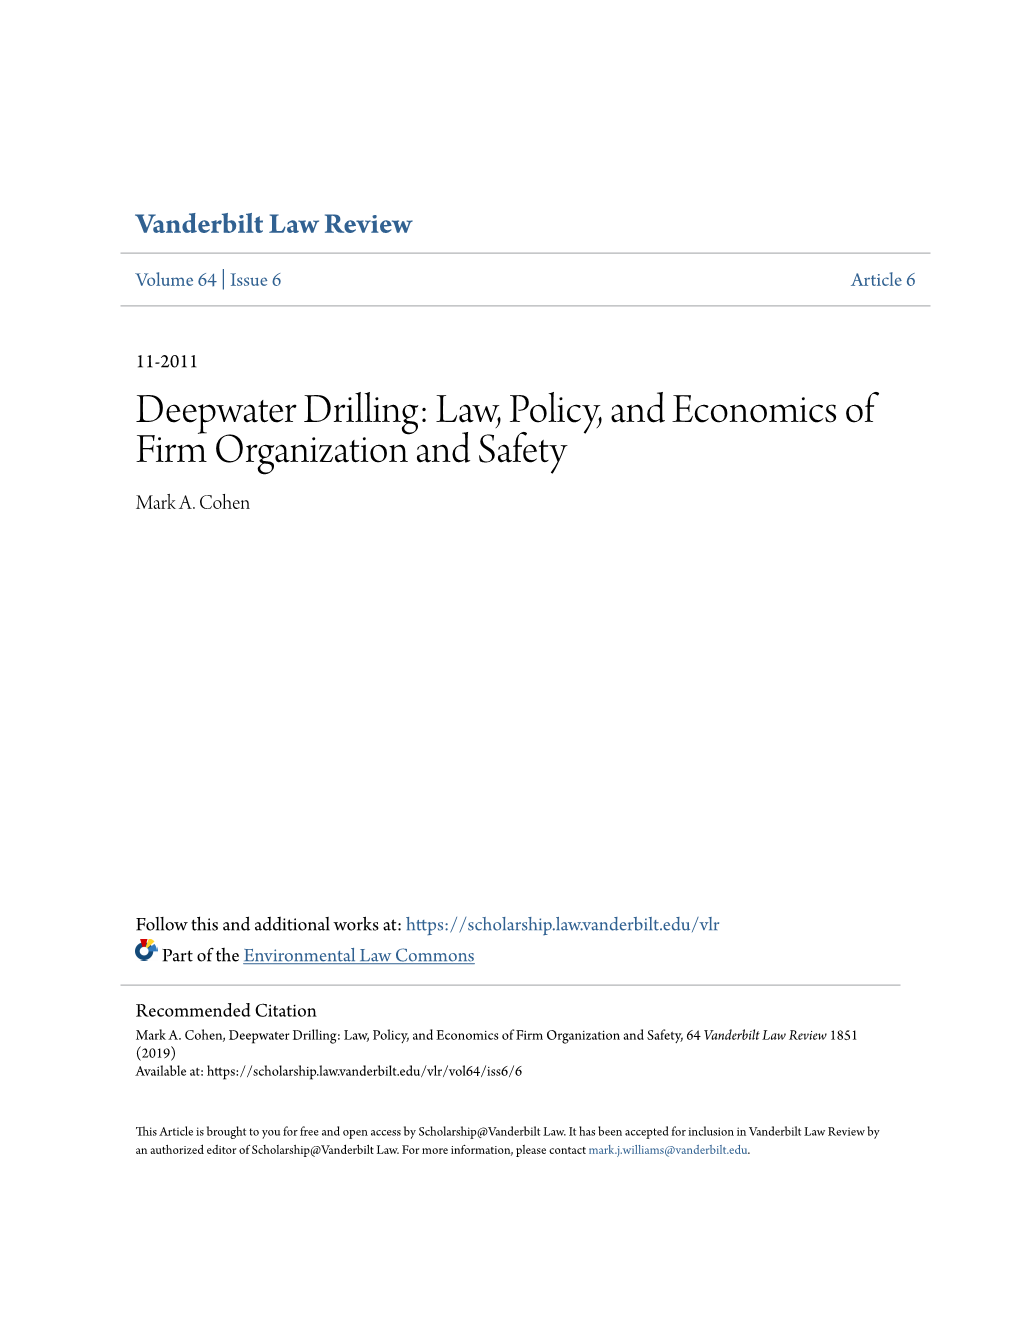 Deepwater Drilling: Law, Policy, and Economics of Firm Organization and Safety Mark A